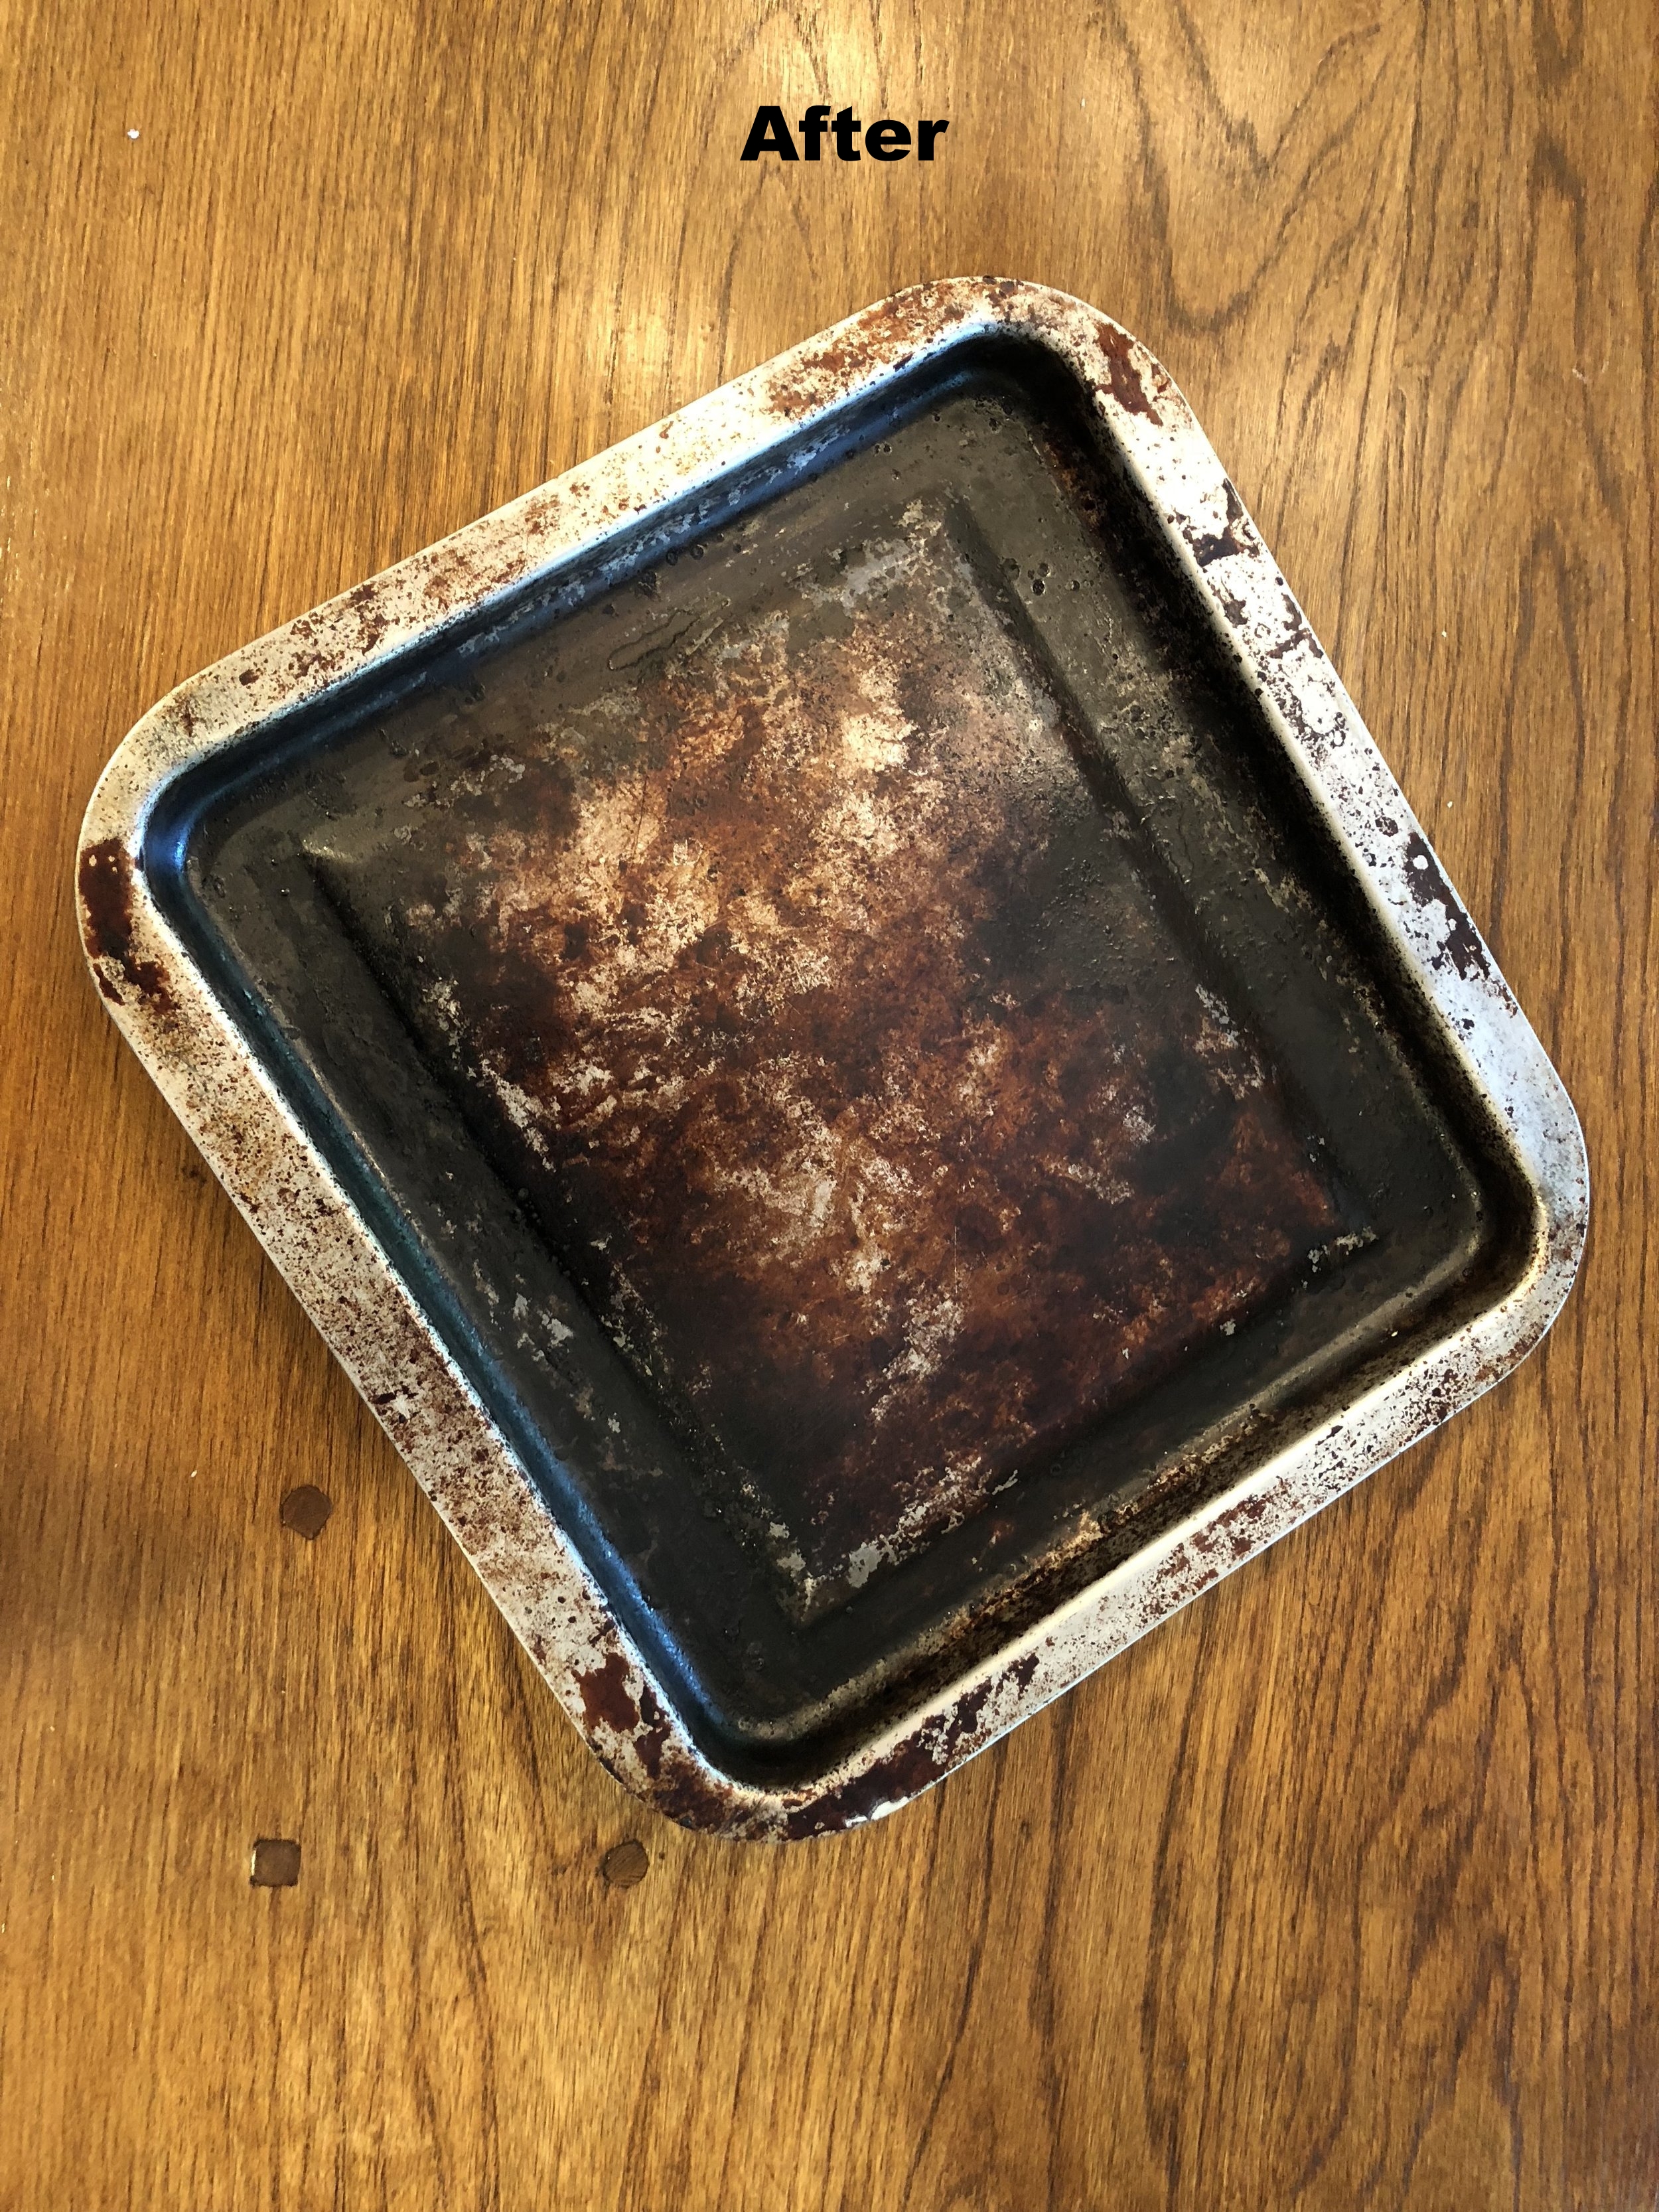 Thoughts while cleaning the toaster oven pan — A Madison Mom